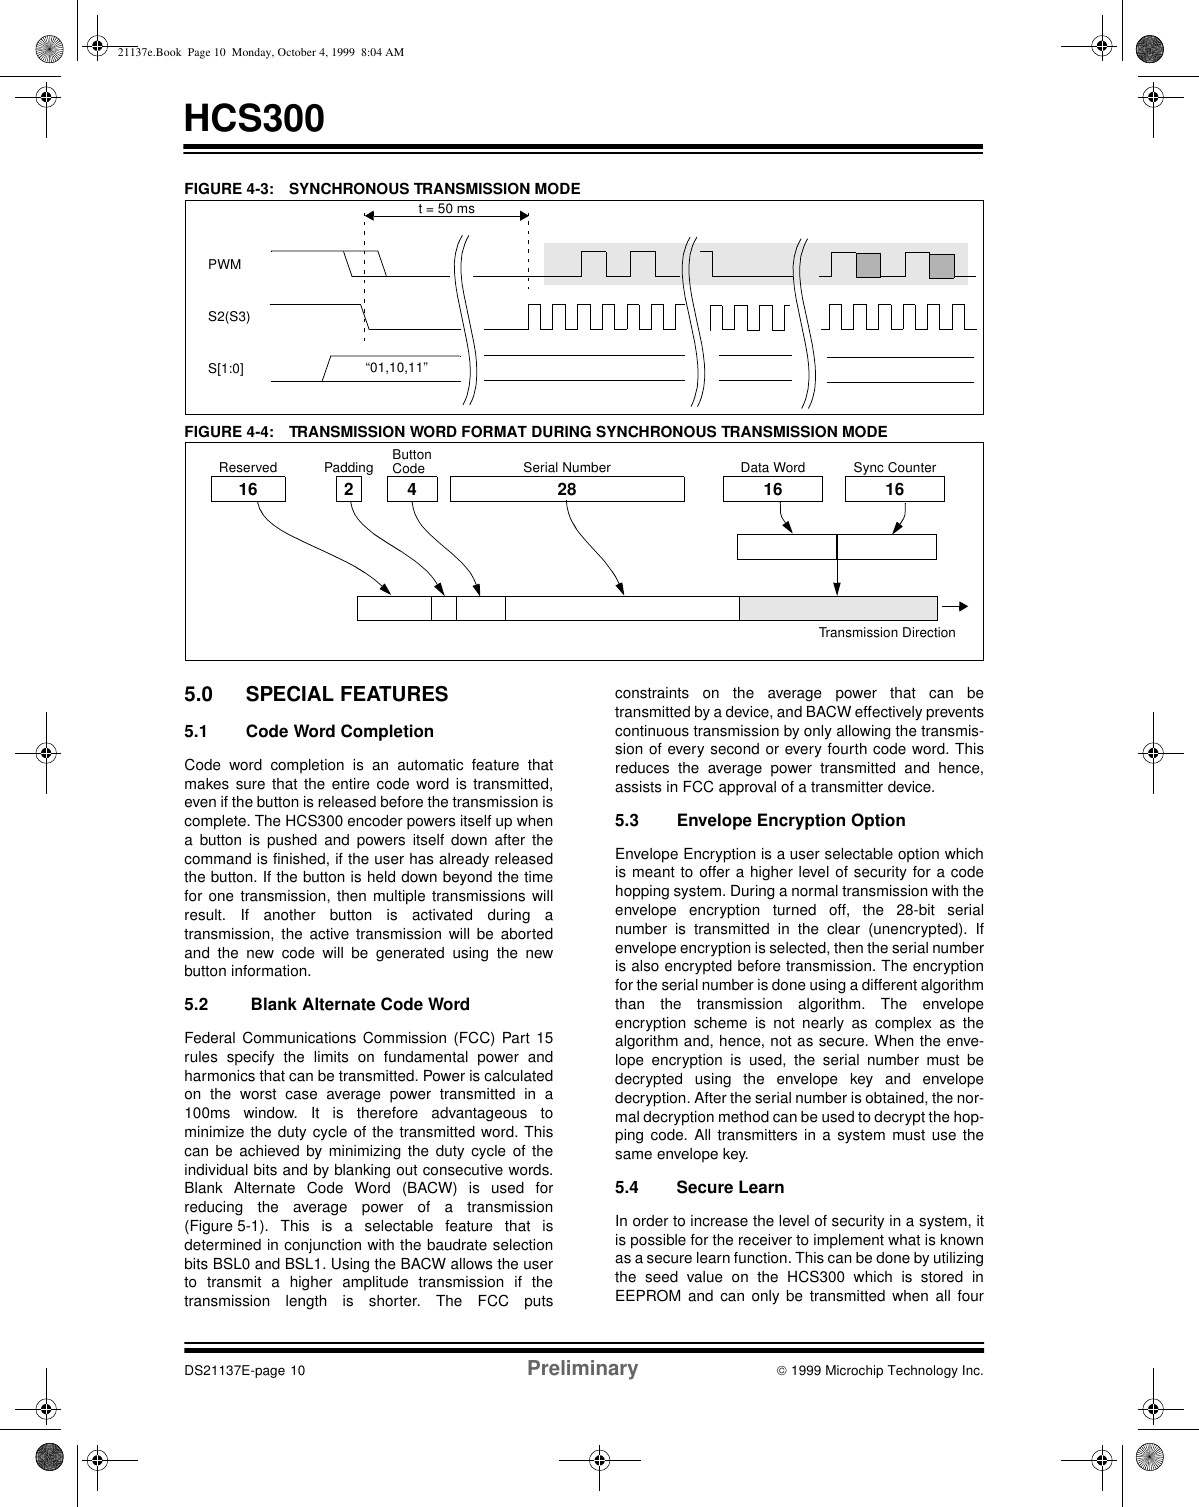 HCS300DS21137E-page 10 Preliminary  1999 Microchip Technology Inc.FIGURE 4-3: SYNCHRONOUS TRANSMISSION MODEFIGURE 4-4: TRANSMISSION WORD FORMAT DURING SYNCHRONOUS TRANSMISSION MODE5.0 SPECIAL FEATURES5.1 Code Word Completion Code word completion is an automatic feature thatmakes sure that the entire code word is transmitted,even if the button is released before the transmission iscomplete. The HCS300 encoder powers itself up whena button is pushed and powers itself down after thecommand is finished, if the user has already releasedthe button. If the button is held down beyond the timefor one transmission, then multiple transmissions willresult. If another button is activated during atransmission, the active transmission will be abortedand the new code will be generated using the newbutton information. 5.2  Blank Alternate Code Word Federal Communications Commission (FCC) Part 15rules specify the limits on fundamental power andharmonics that can be transmitted. Power is calculatedon the worst case average power transmitted in a100ms window. It is therefore advantageous tominimize the duty cycle of the transmitted word. Thiscan be achieved by minimizing the duty cycle of theindividual bits and by blanking out consecutive words.Blank Alternate Code Word (BACW) is used forreducing the average power of a transmission(Figure 5-1). This is a selectable feature that isdetermined in conjunction with the baudrate selectionbits BSL0 and BSL1. Using the BACW allows the userto transmit a higher amplitude transmission if thetransmission length is shorter. The FCC putsconstraints on the average power that can betransmitted by a device, and BACW effectively preventscontinuous transmission by only allowing the transmis-sion of every second or every fourth code word. Thisreduces the average power transmitted and hence,assists in FCC approval of a transmitter device.5.3 Envelope Encryption OptionEnvelope Encryption is a user selectable option whichis meant to offer a higher level of security for a codehopping system. During a normal transmission with theenvelope encryption turned off, the 28-bit serialnumber is transmitted in the clear (unencrypted). Ifenvelope encryption is selected, then the serial numberis also encrypted before transmission. The encryptionfor the serial number is done using a different algorithmthan the transmission algorithm. The envelopeencryption scheme is not nearly as complex as thealgorithm and, hence, not as secure. When the enve-lope encryption is used, the serial number must bedecrypted using the envelope key and envelopedecryption. After the serial number is obtained, the nor-mal decryption method can be used to decrypt the hop-ping code. All transmitters in a system must use thesame envelope key.5.4 Secure LearnIn order to increase the level of security in a system, itis possible for the receiver to implement what is knownas a secure learn function. This can be done by utilizingthe seed value on the HCS300 which is stored inEEPROM and can only be transmitted when all fourt = 50 ms“01,10,11”PWMS2(S3)S[1:0]16 2 4 28 16 16Transmission DirectionReserved Padding ButtonCode Serial Number Data Word Sync Counter21137e.Book  Page 10  Monday, October 4, 1999  8:04 AM